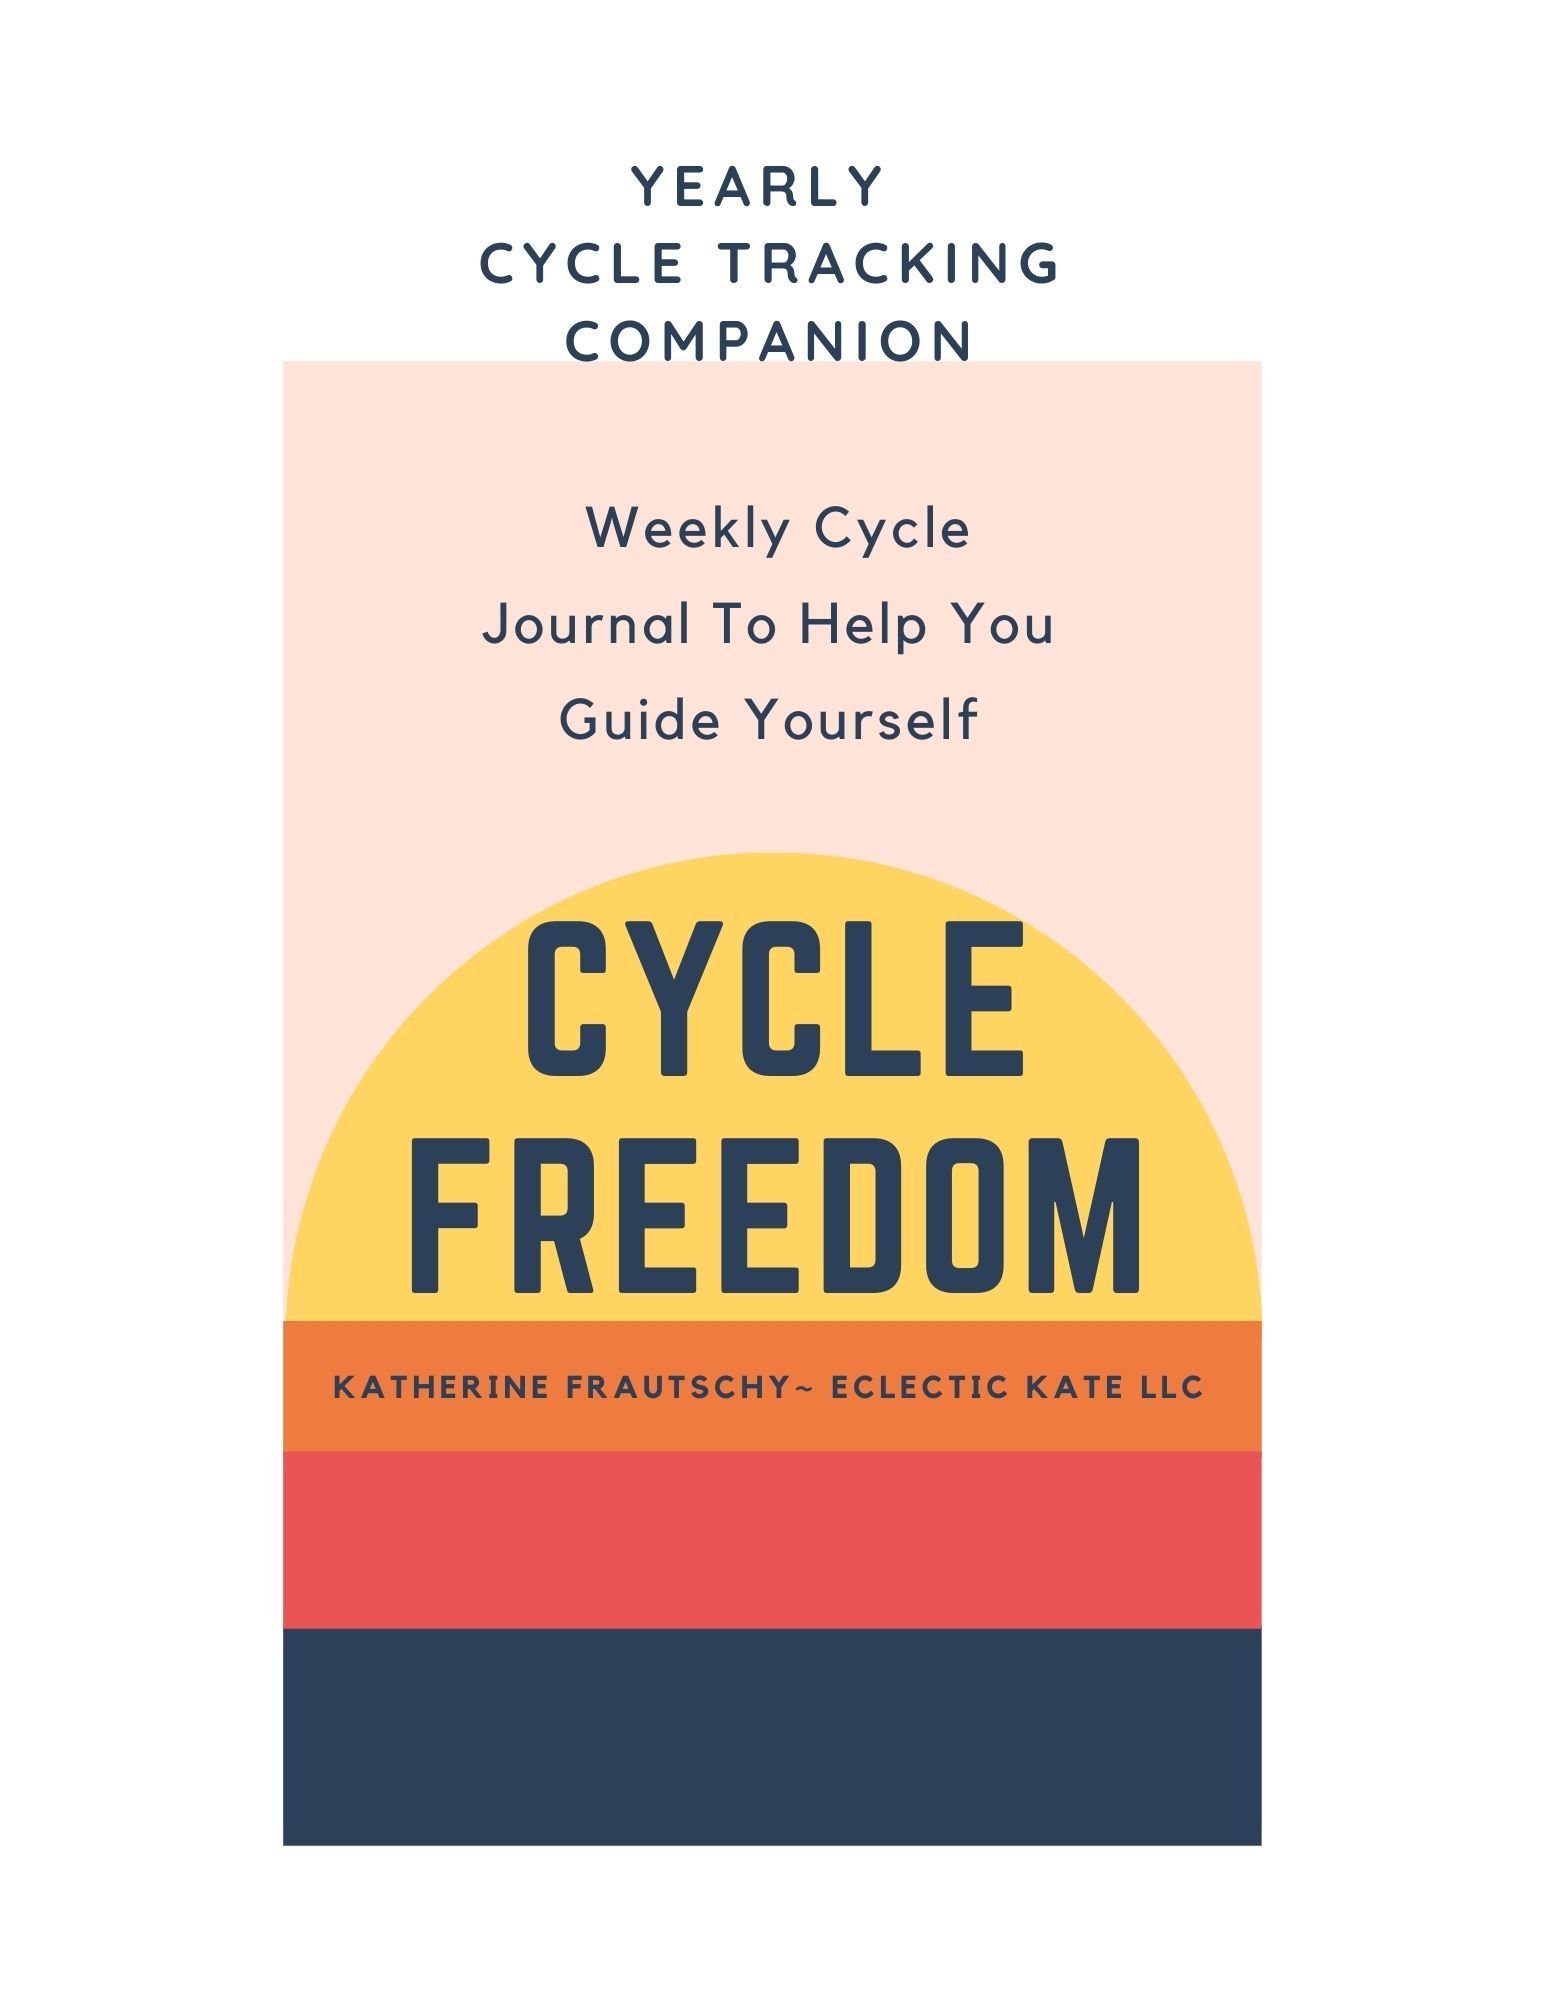 Cycle Freedom Journal cover.jpg